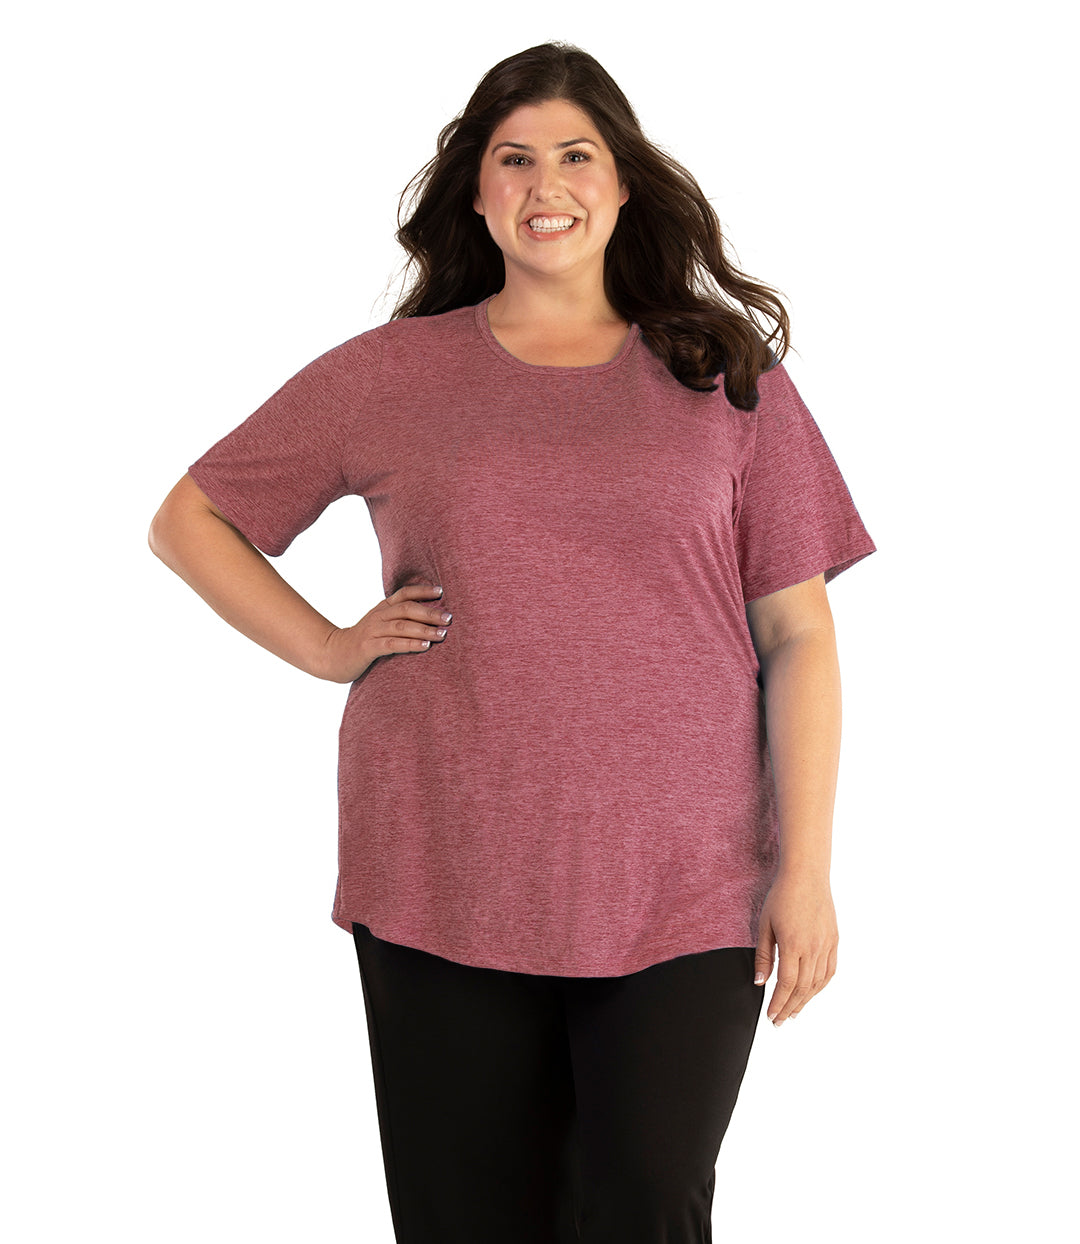 Plus size woman, facing front, wearing JunoActive plus size QuikLite Scoop Neck Short Sleeve top in the color Roseate. She is wearing JunoActive Plus Size Leggings in the color black.